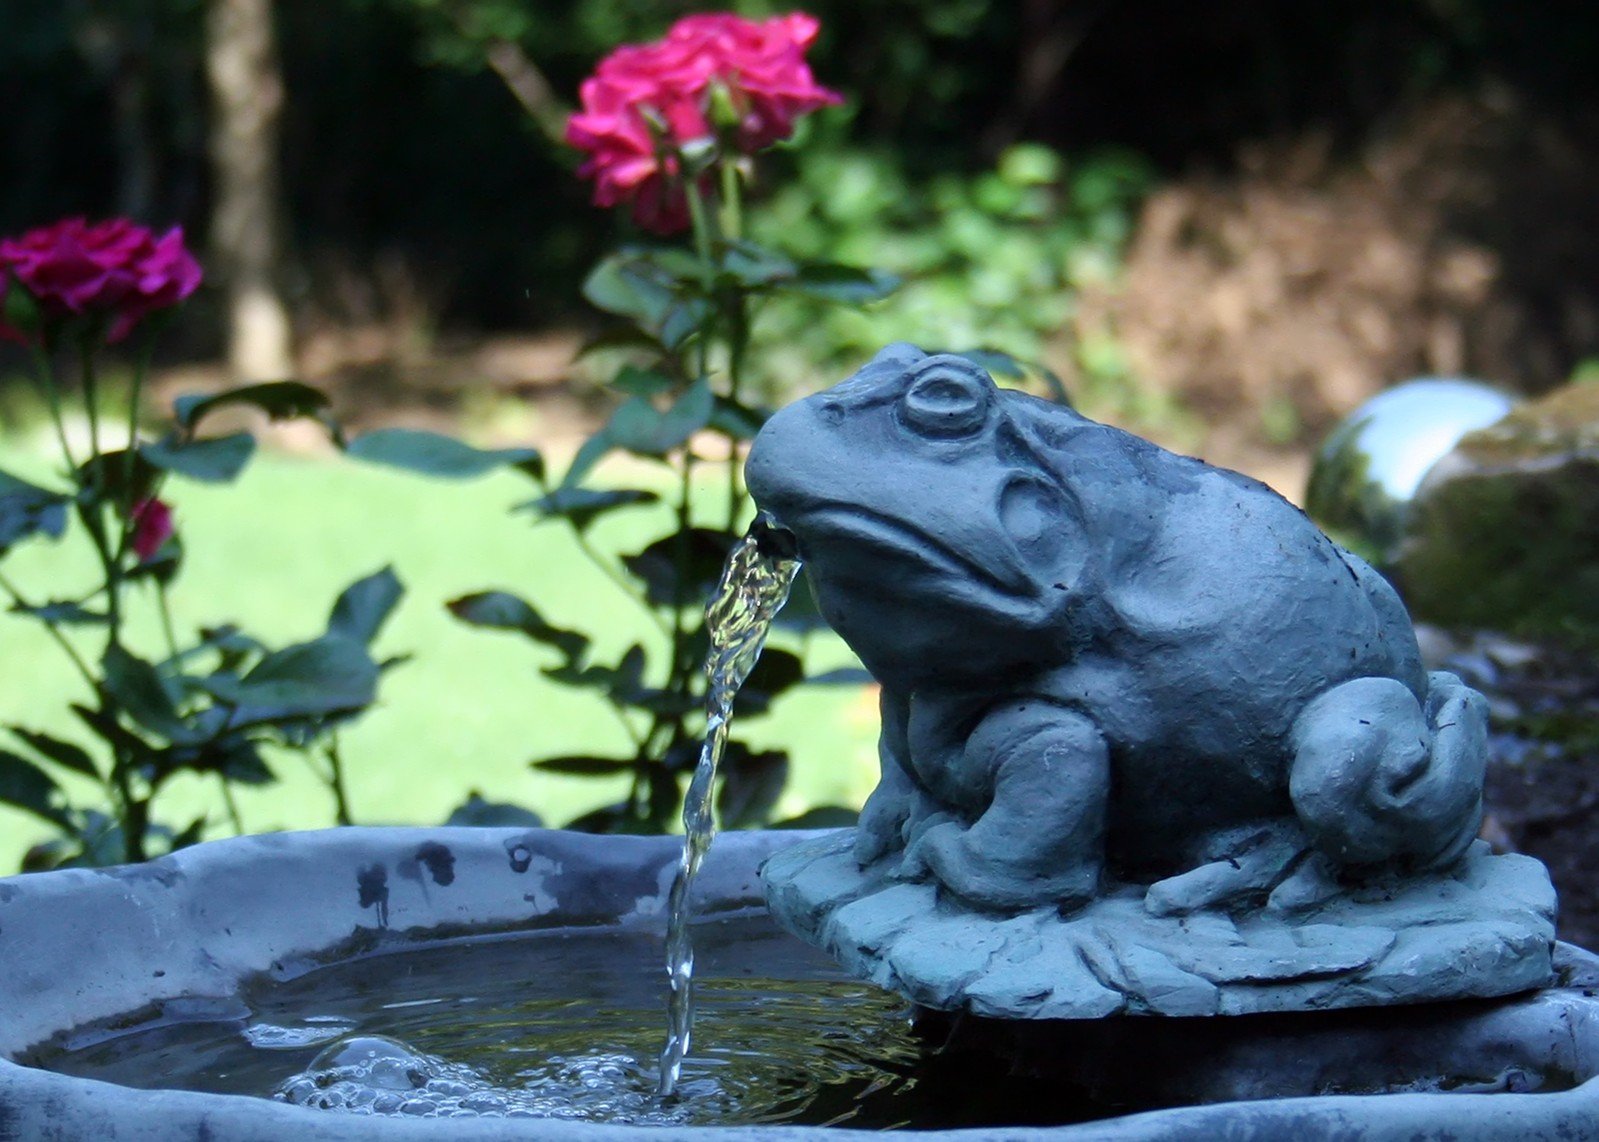 a large gray frog sitting on a planter